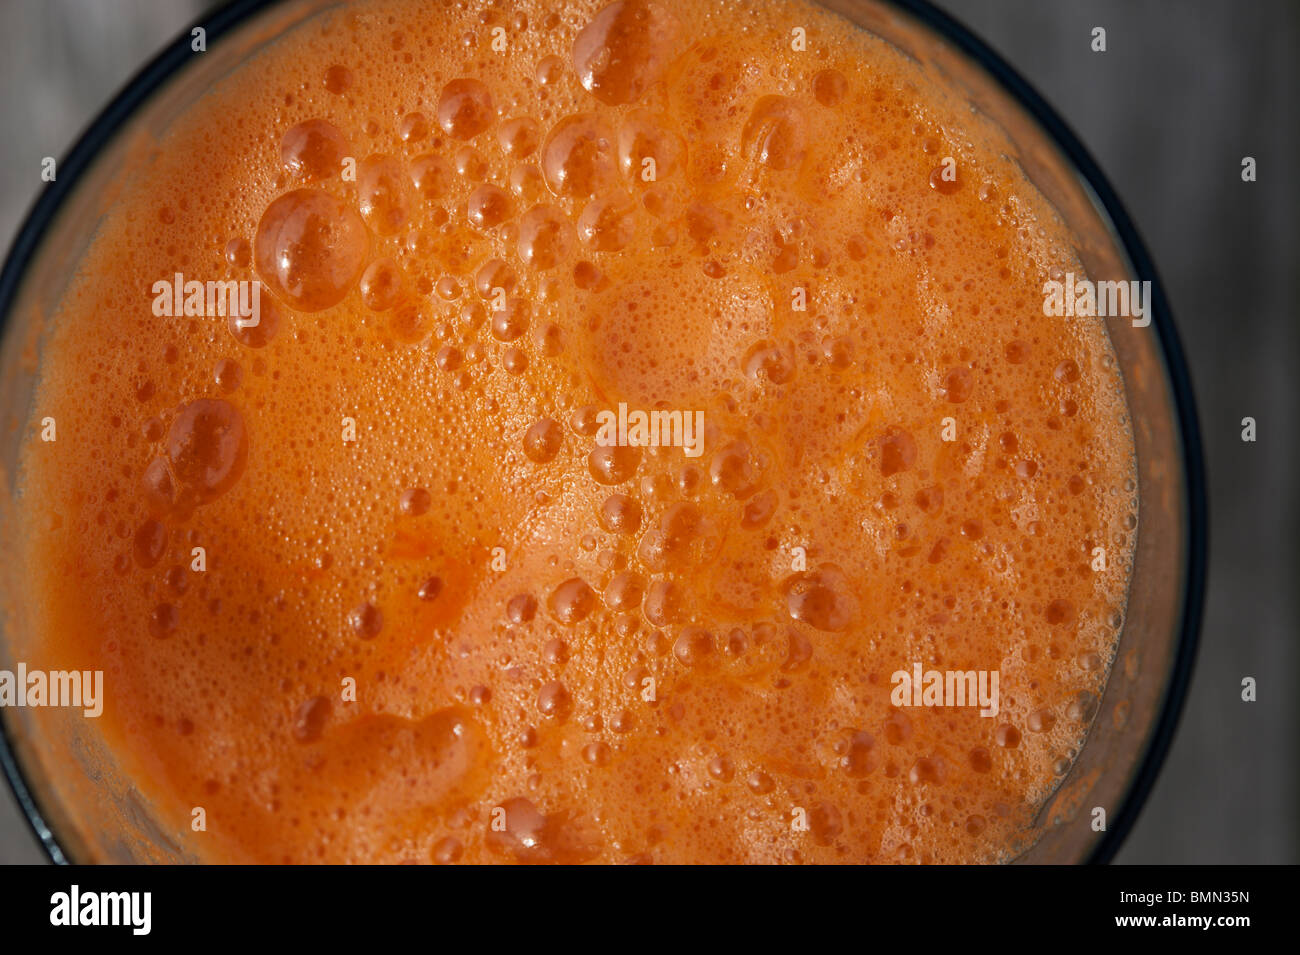 A glass of freshly squeezed carrot and apple juice seen from above. Stock Photo